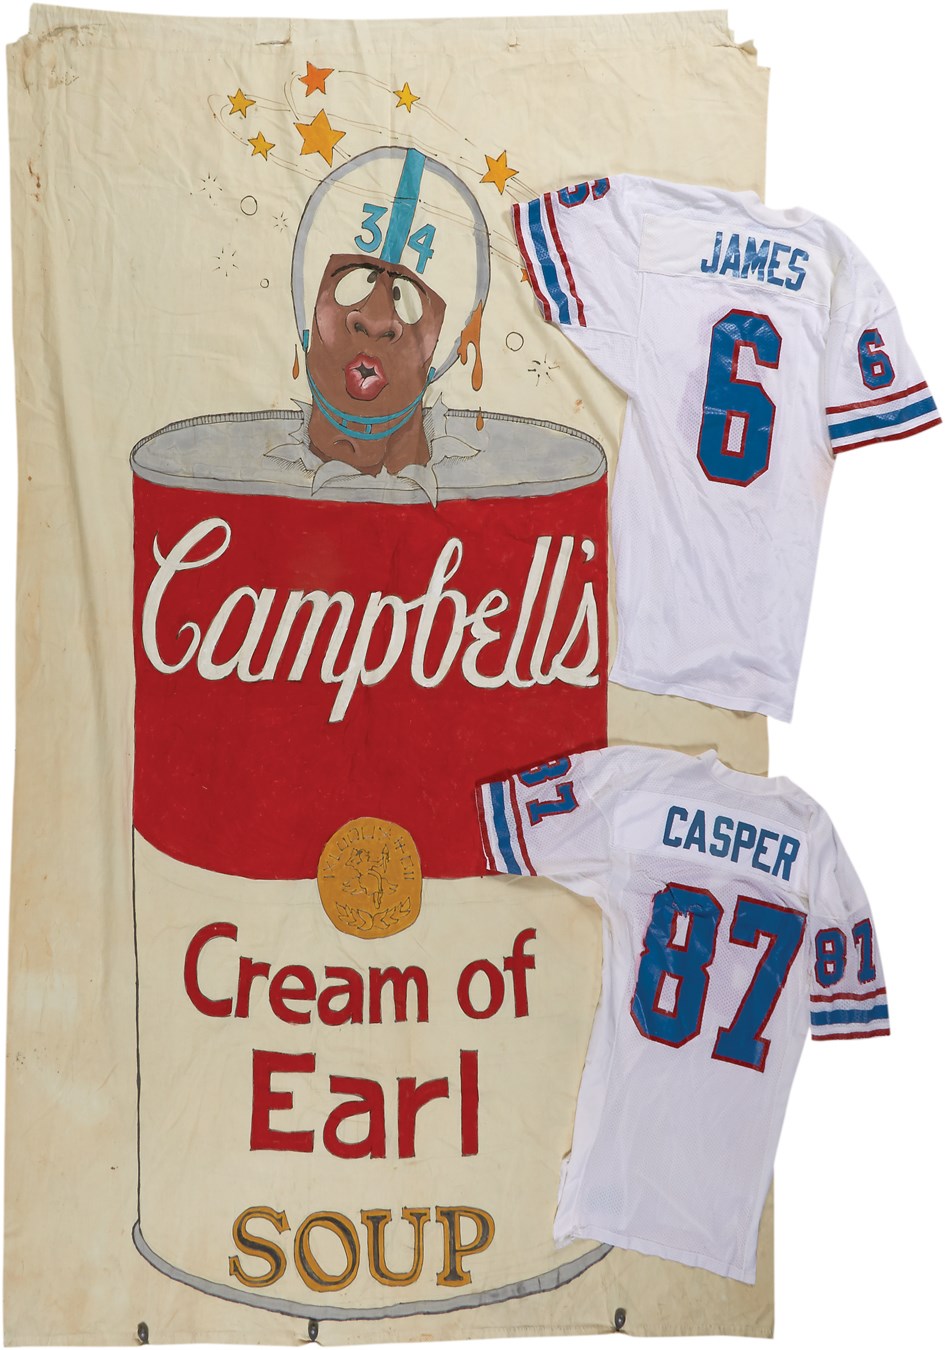 Football - 1980s Dave Casper & John James Game Worn Oilers Jersey with Photomatched Earl Campbell 1980 AFC Wild Card Game Banner